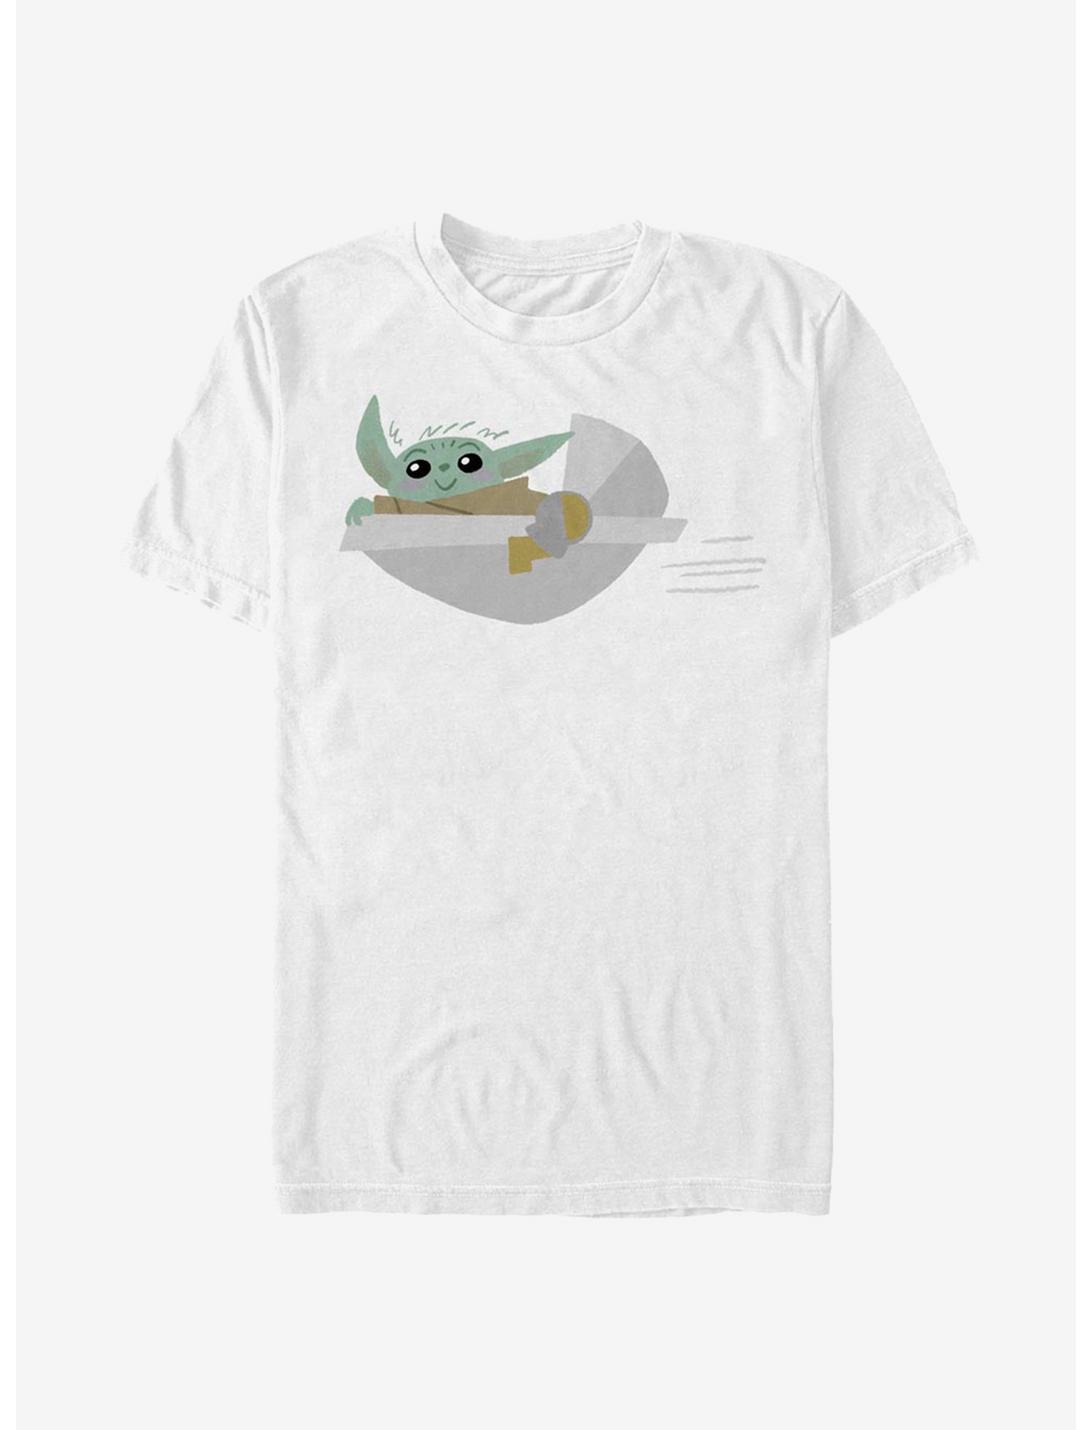 Star Wars The Mandalorian The Child Flying By T-Shirt, WHITE, hi-res